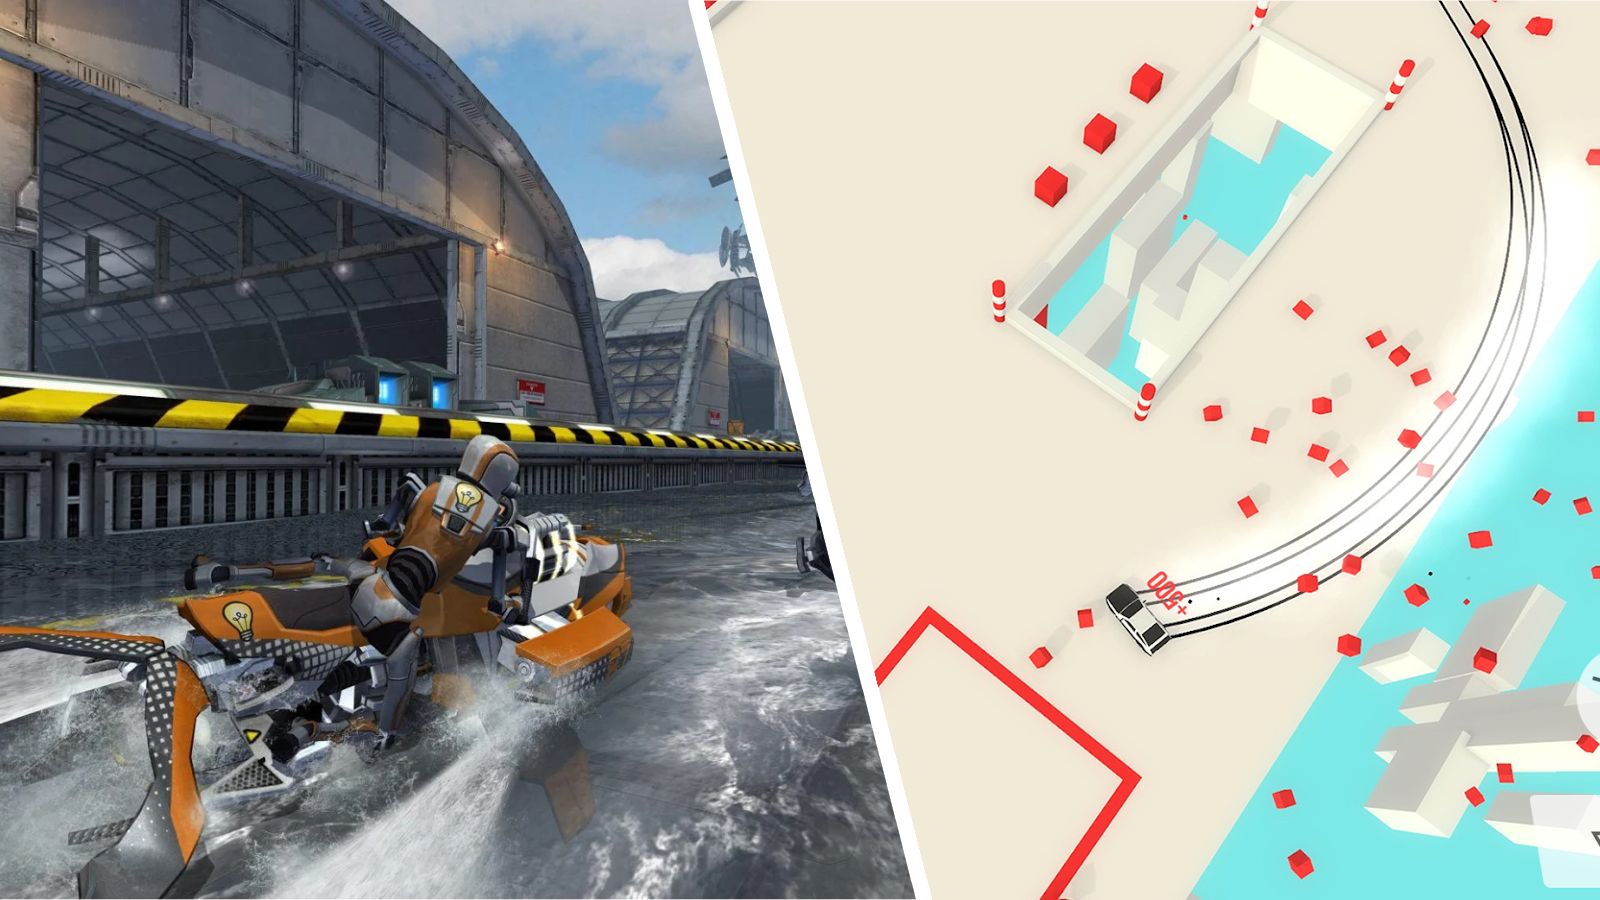 Screenshots of Riptide GP and Absolute Drift in a collage